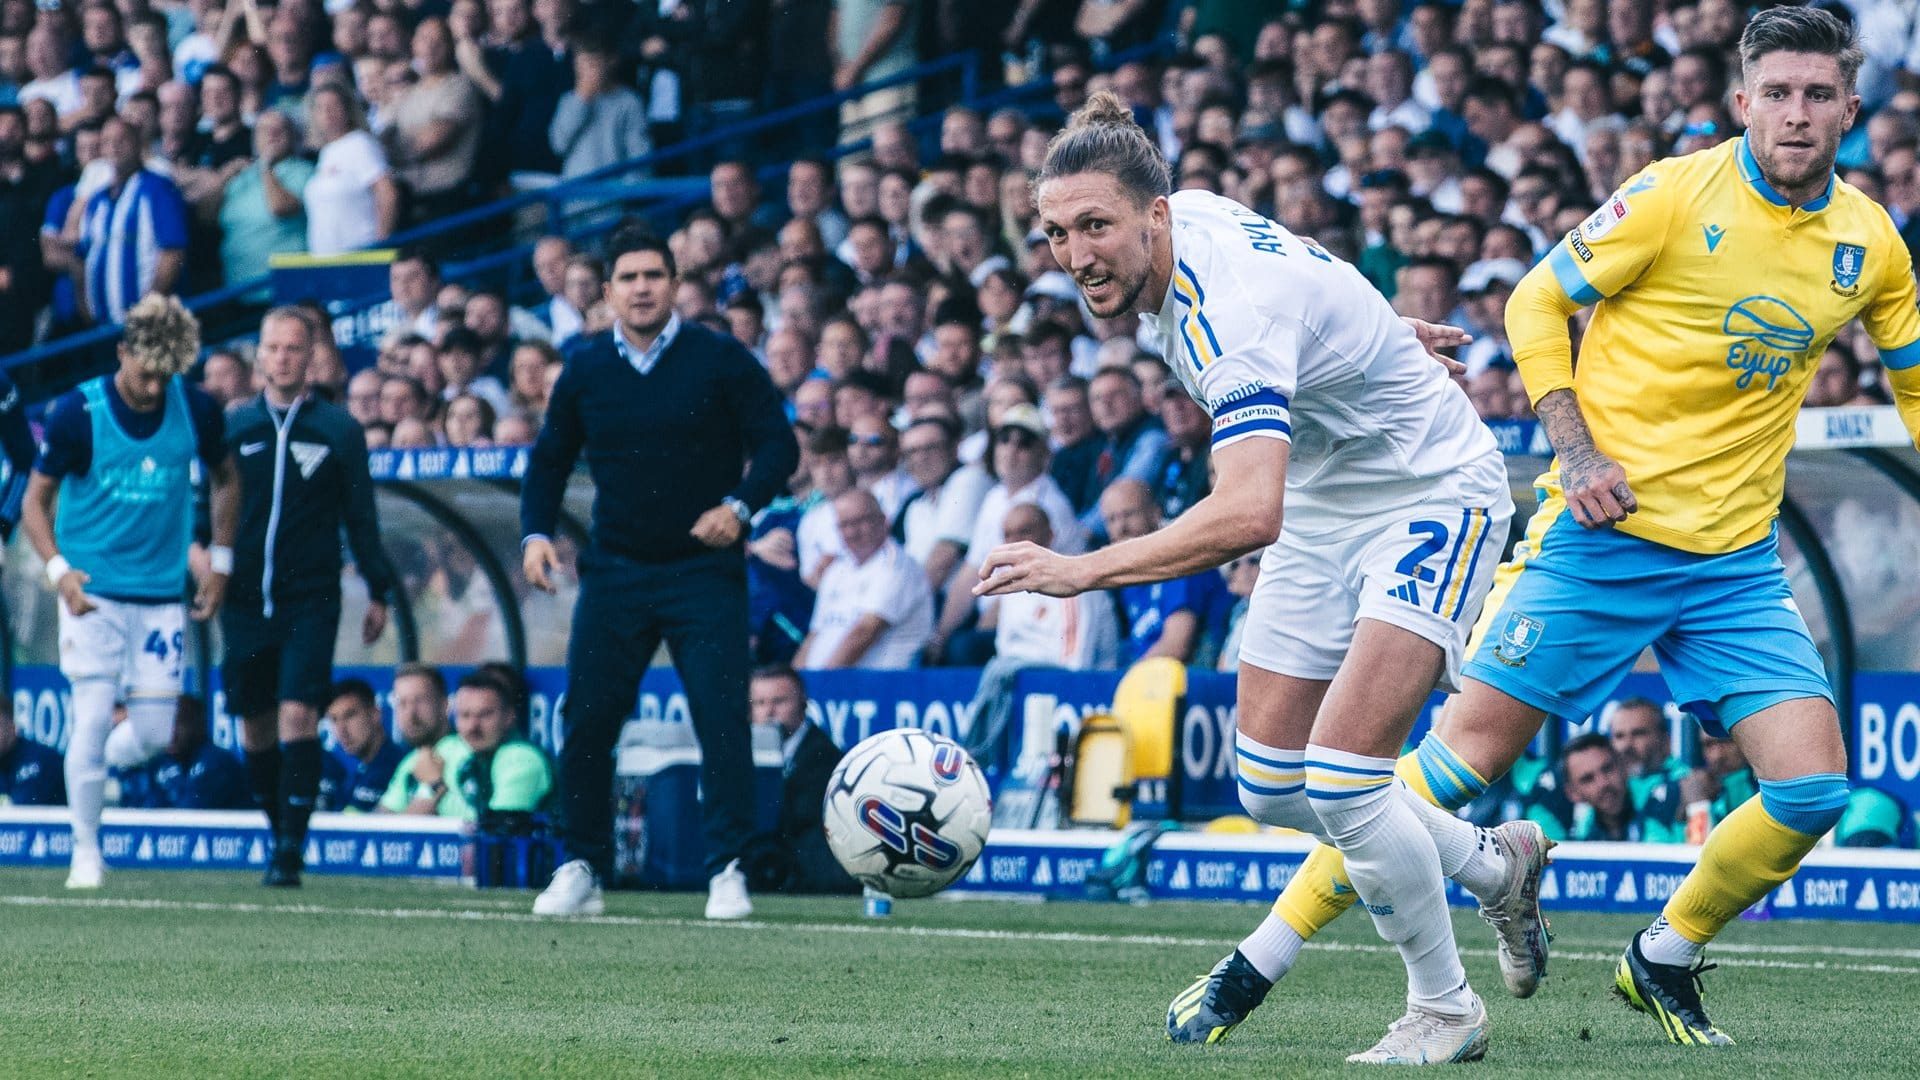 Luke Ayling going after the ball during the game against Sheffield Wednesday, his eyes on it very intently